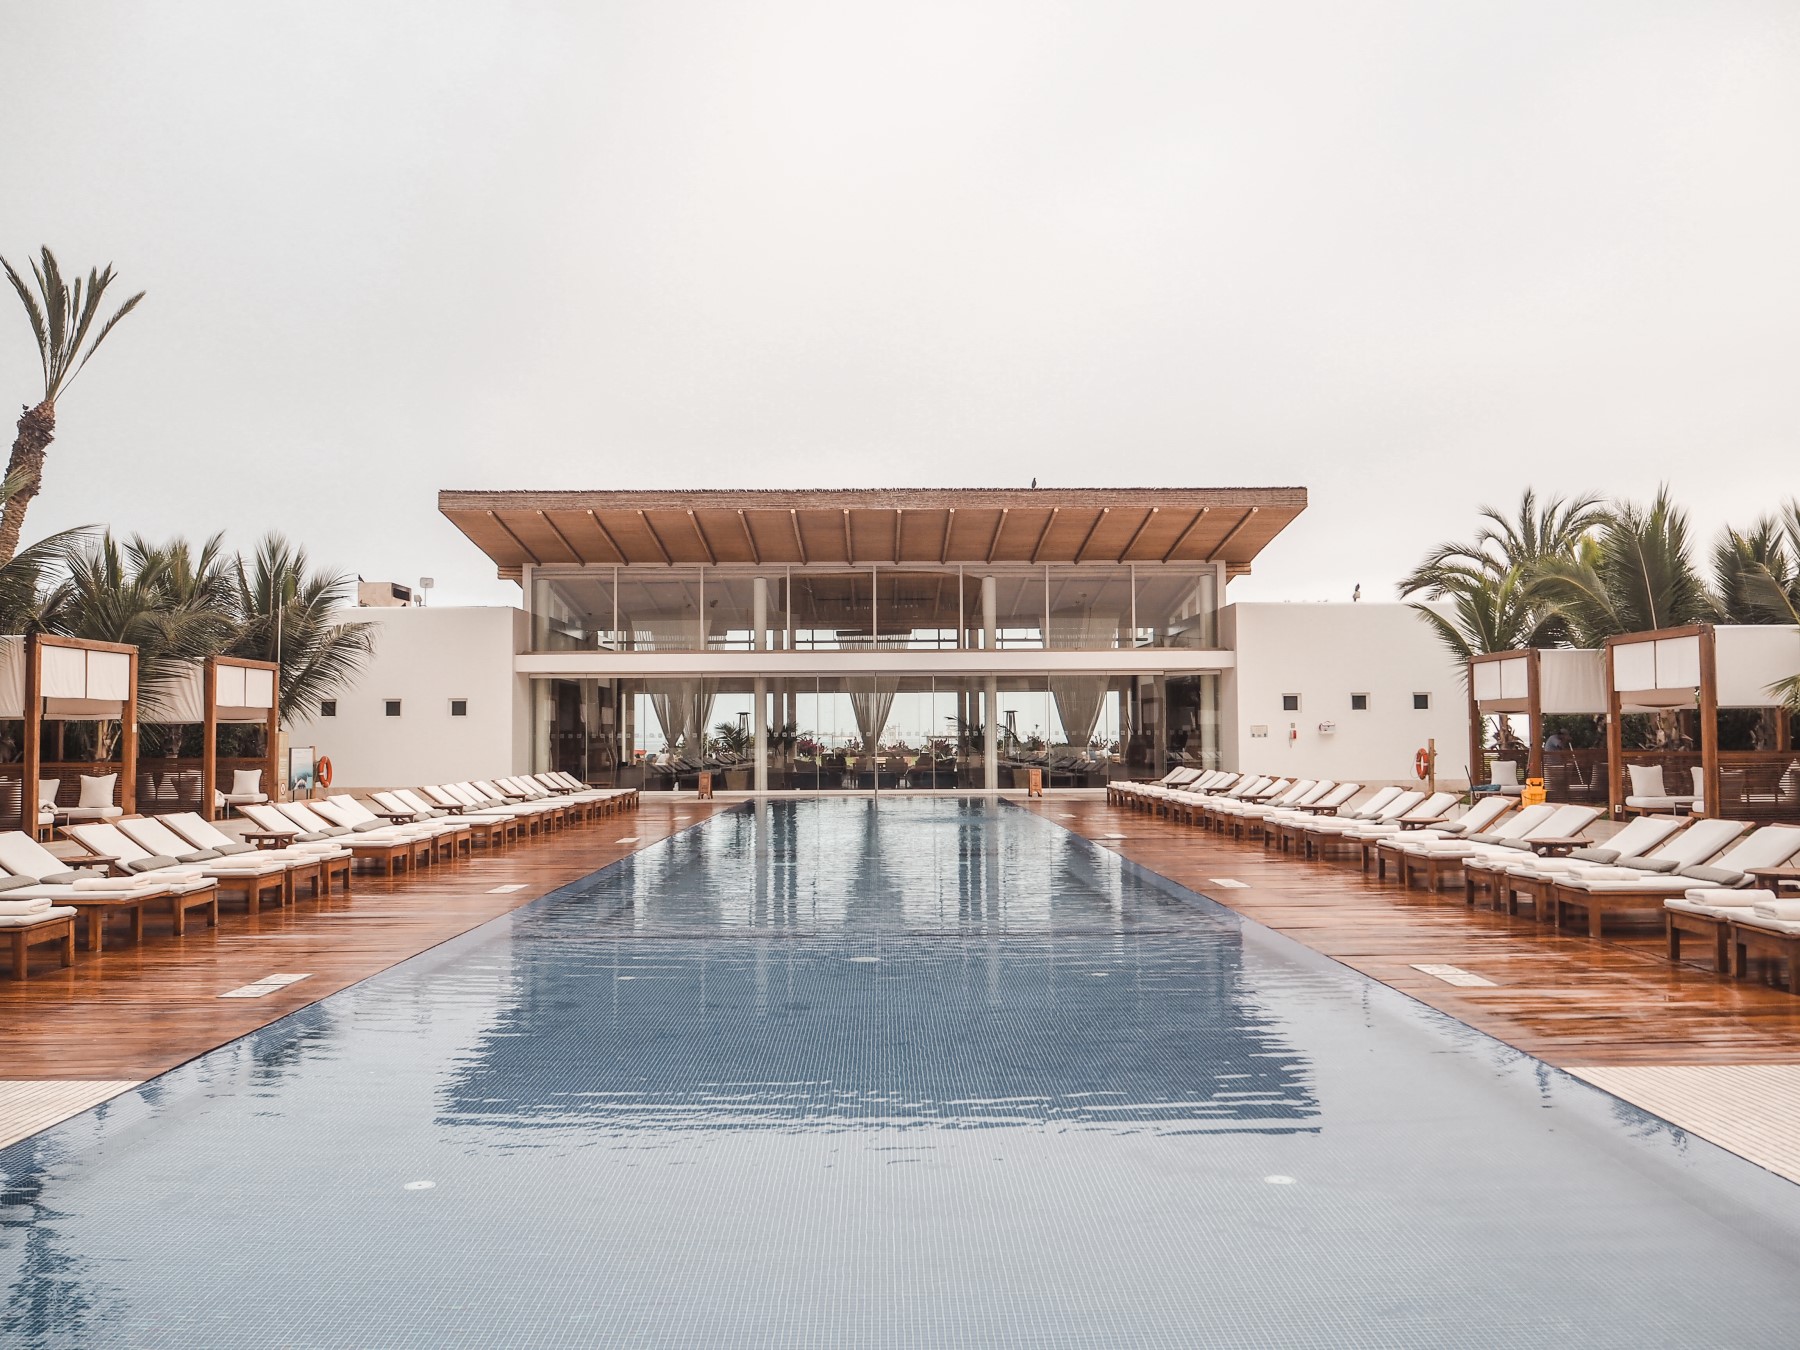 The Best Resort For A Quick Sunny Getaway From Lima | lifestyletraveler.co | IG: @lifestyletraveler.co